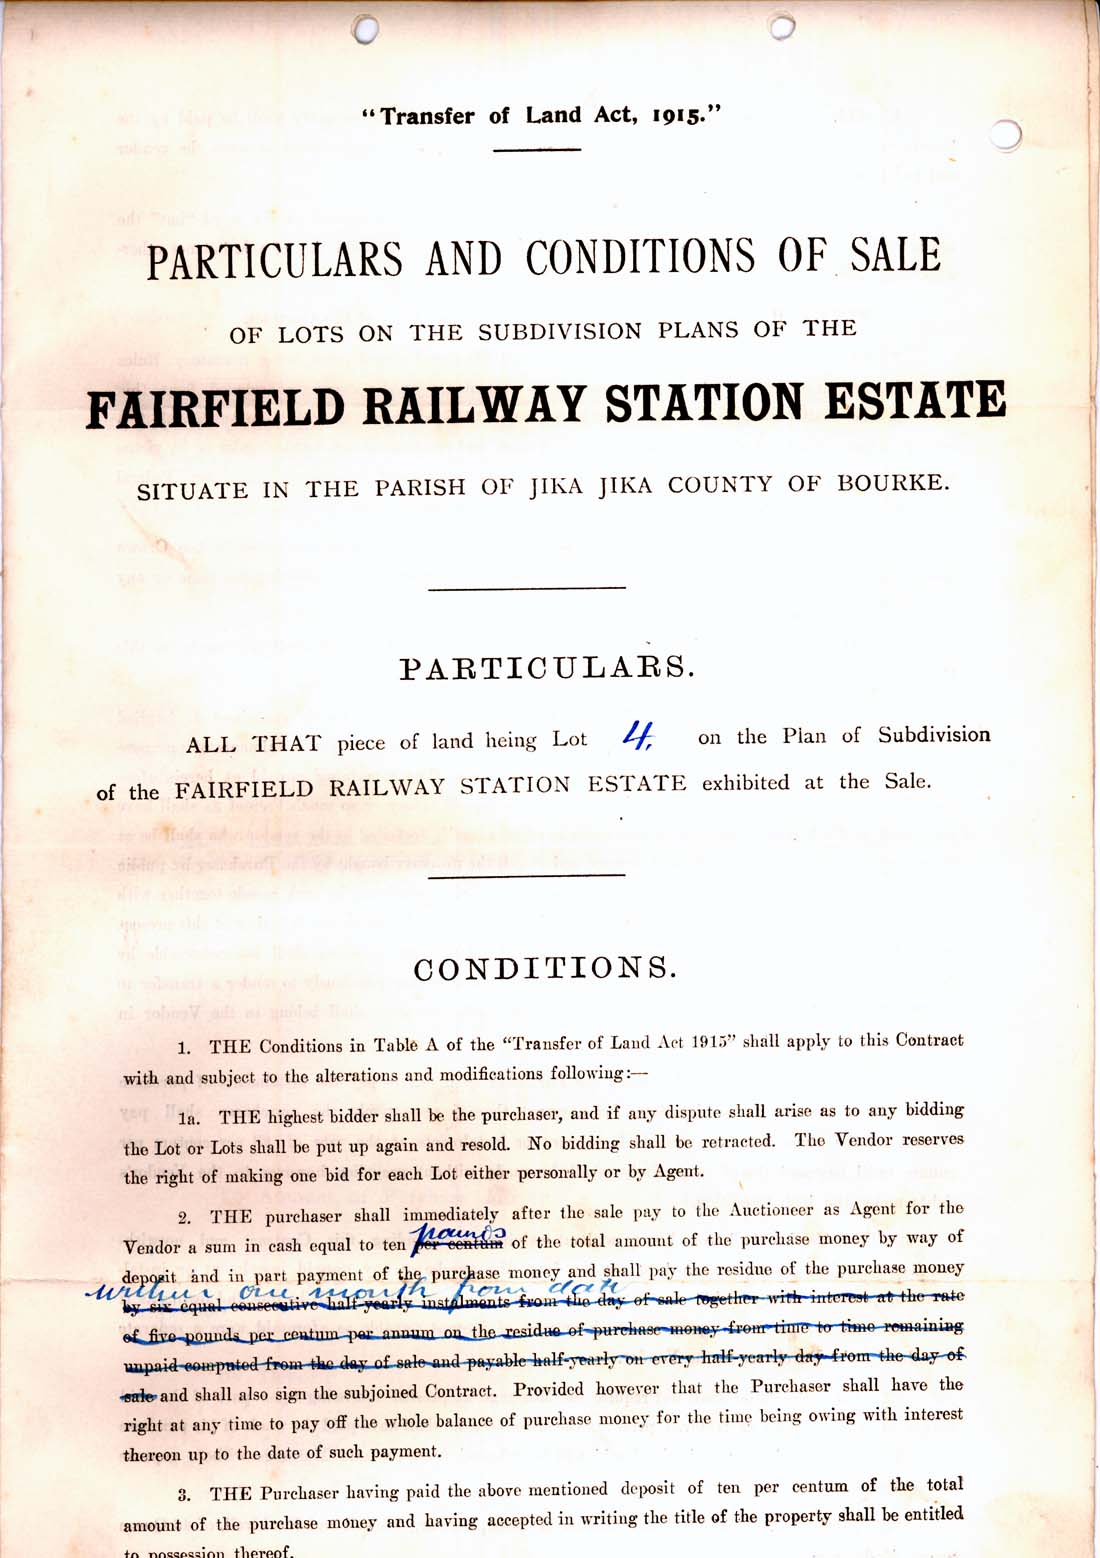 Image of a Transfer of land document Fairfield Railway Station Estate for Mrs Eation